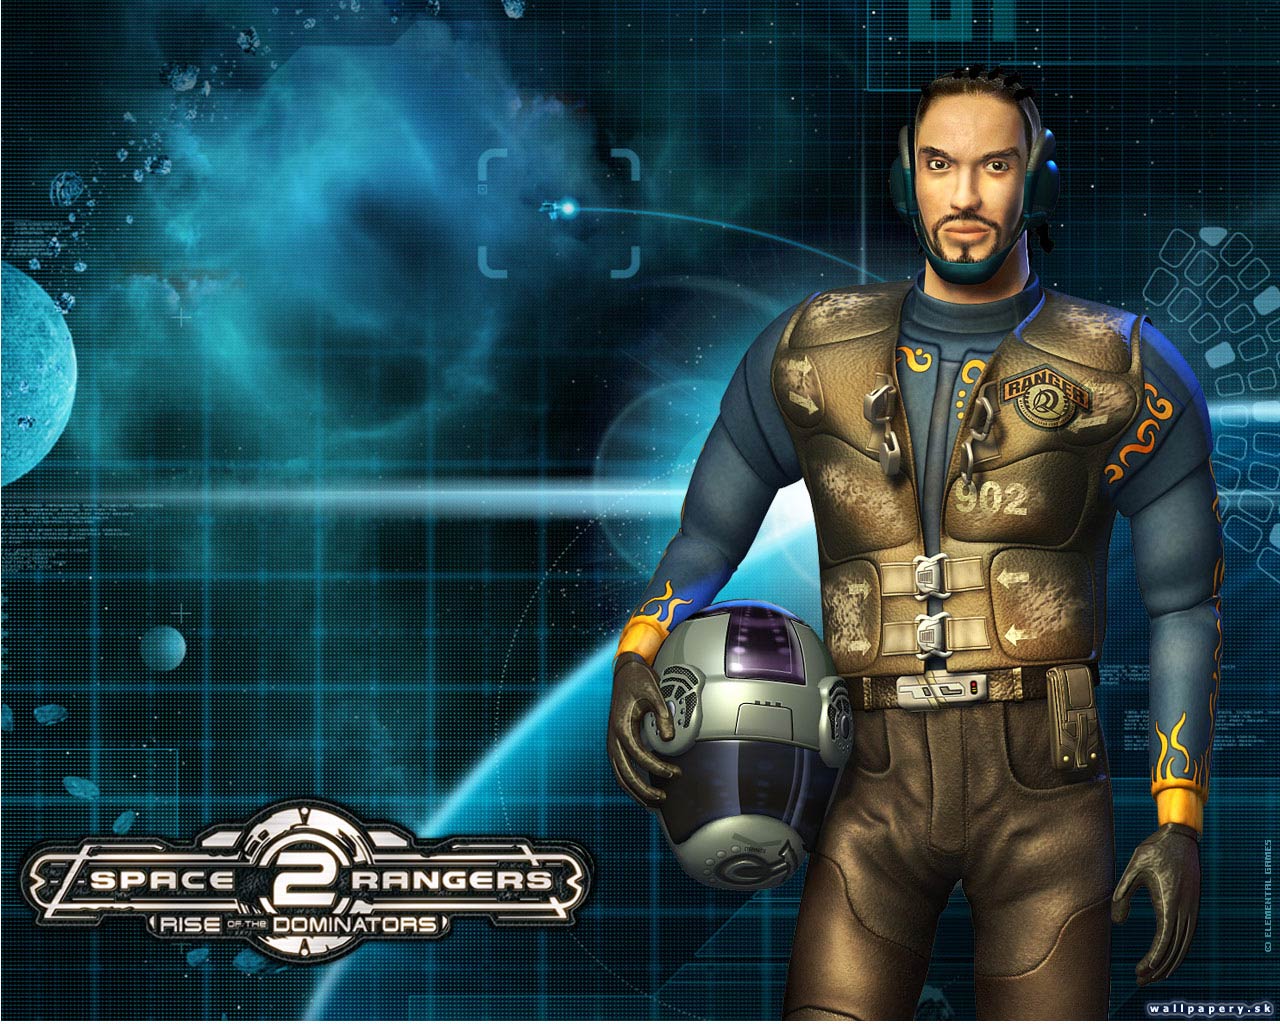 Space Rangers 2: Rise Of The Dominators - wallpaper 6